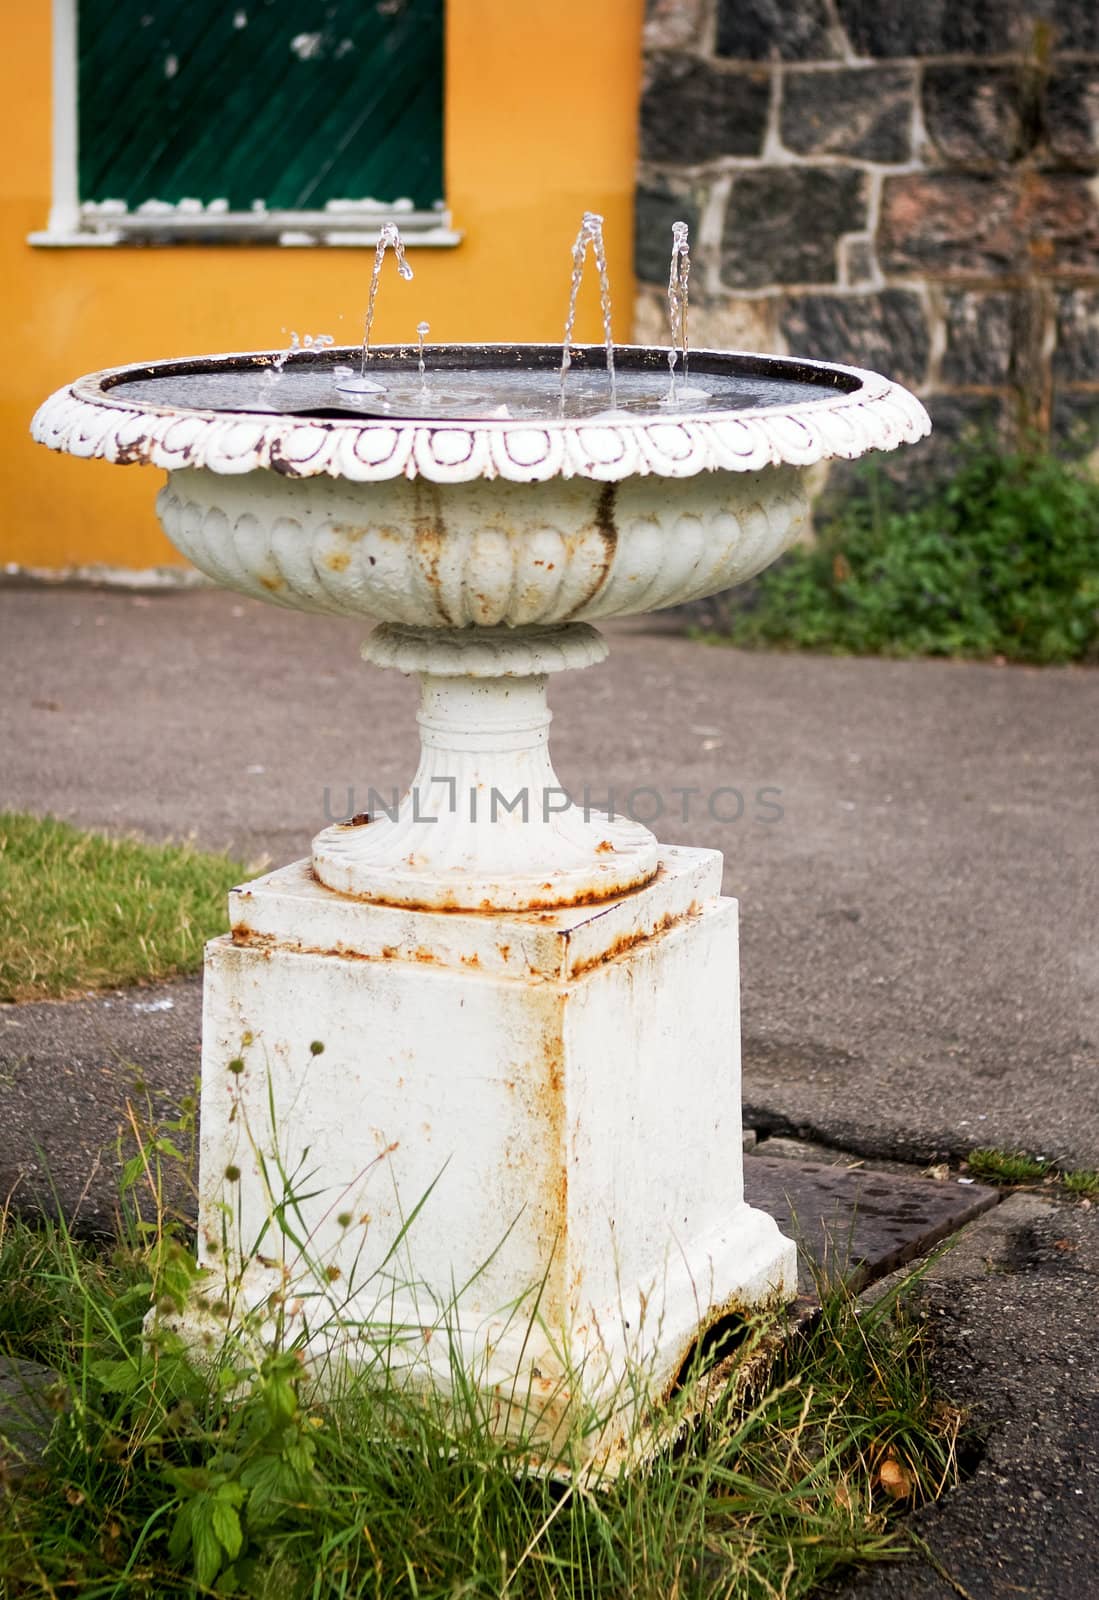 An old waterfountain in a urban area